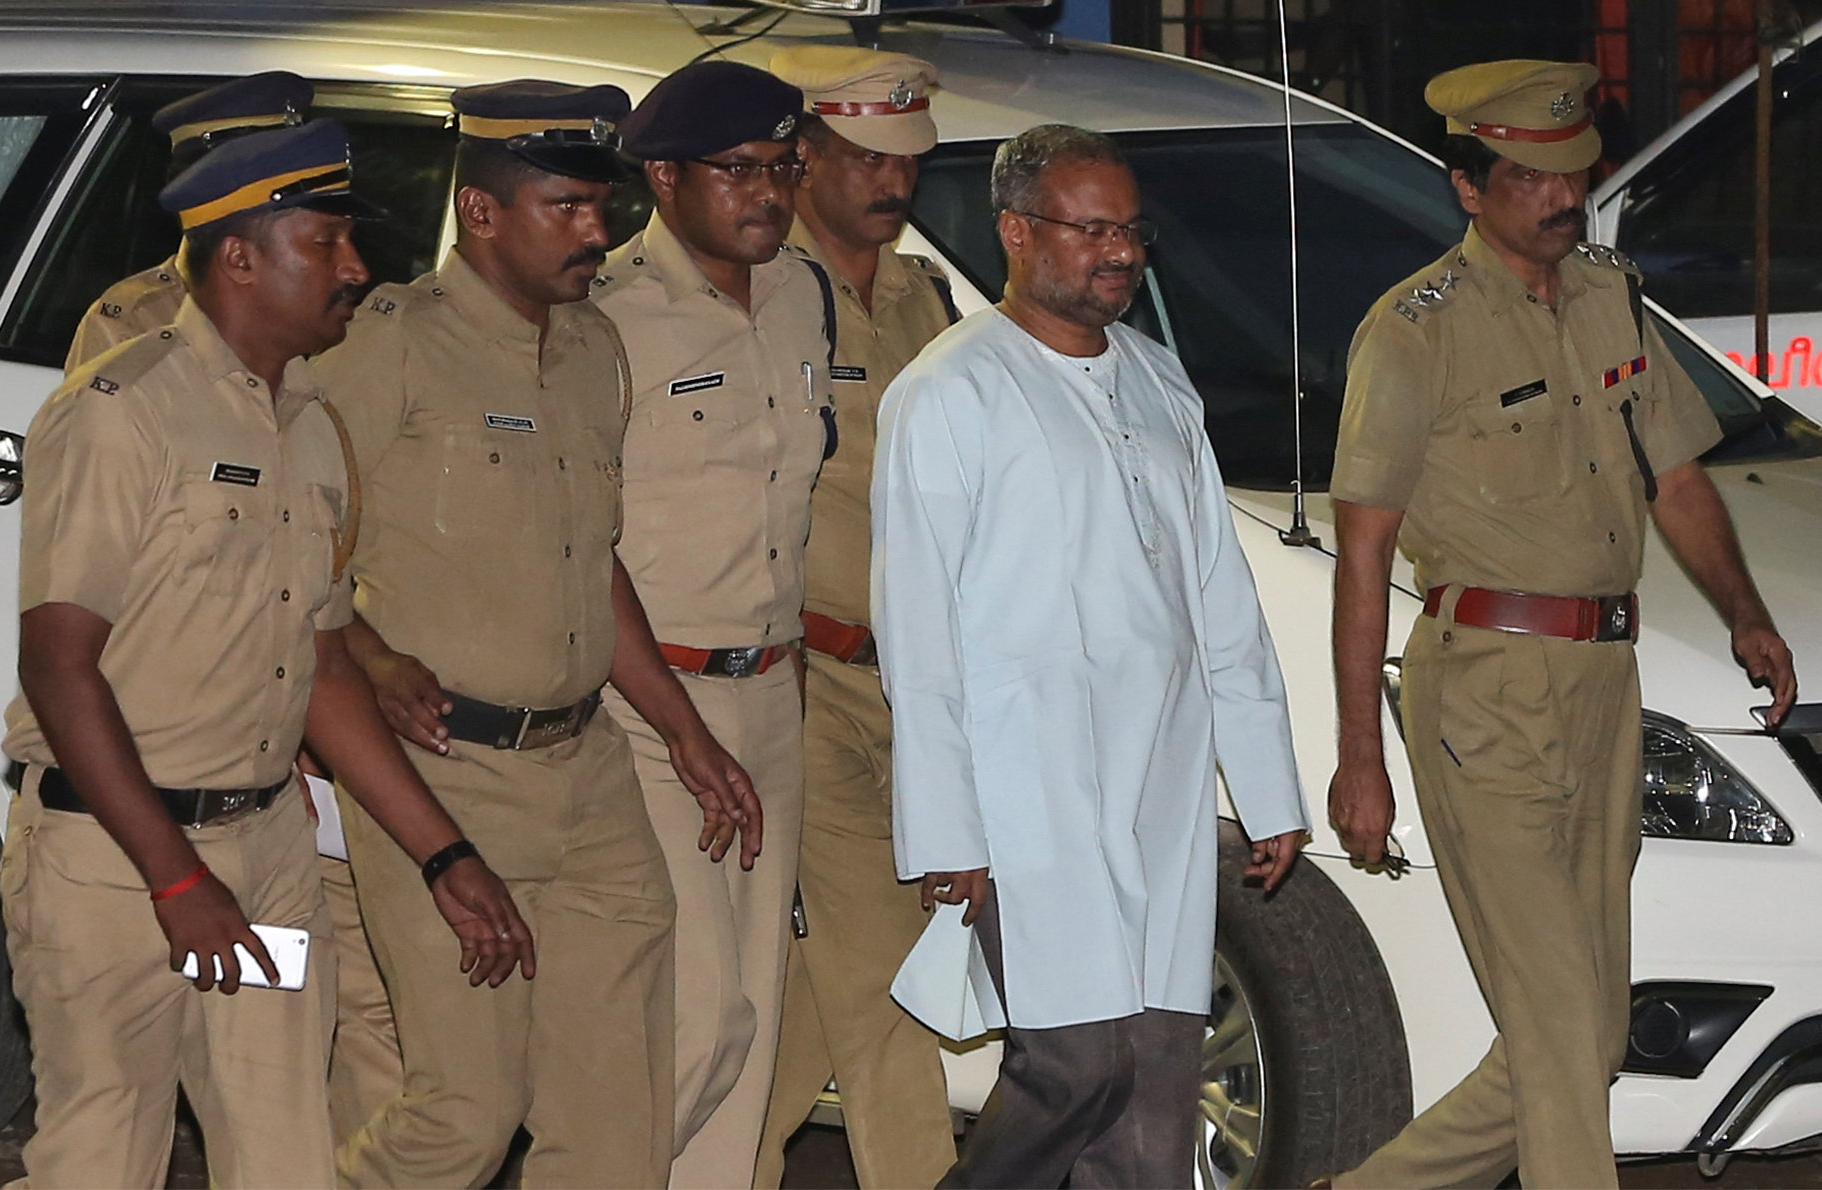 Court in India denies bail to bishop accused of raping nun